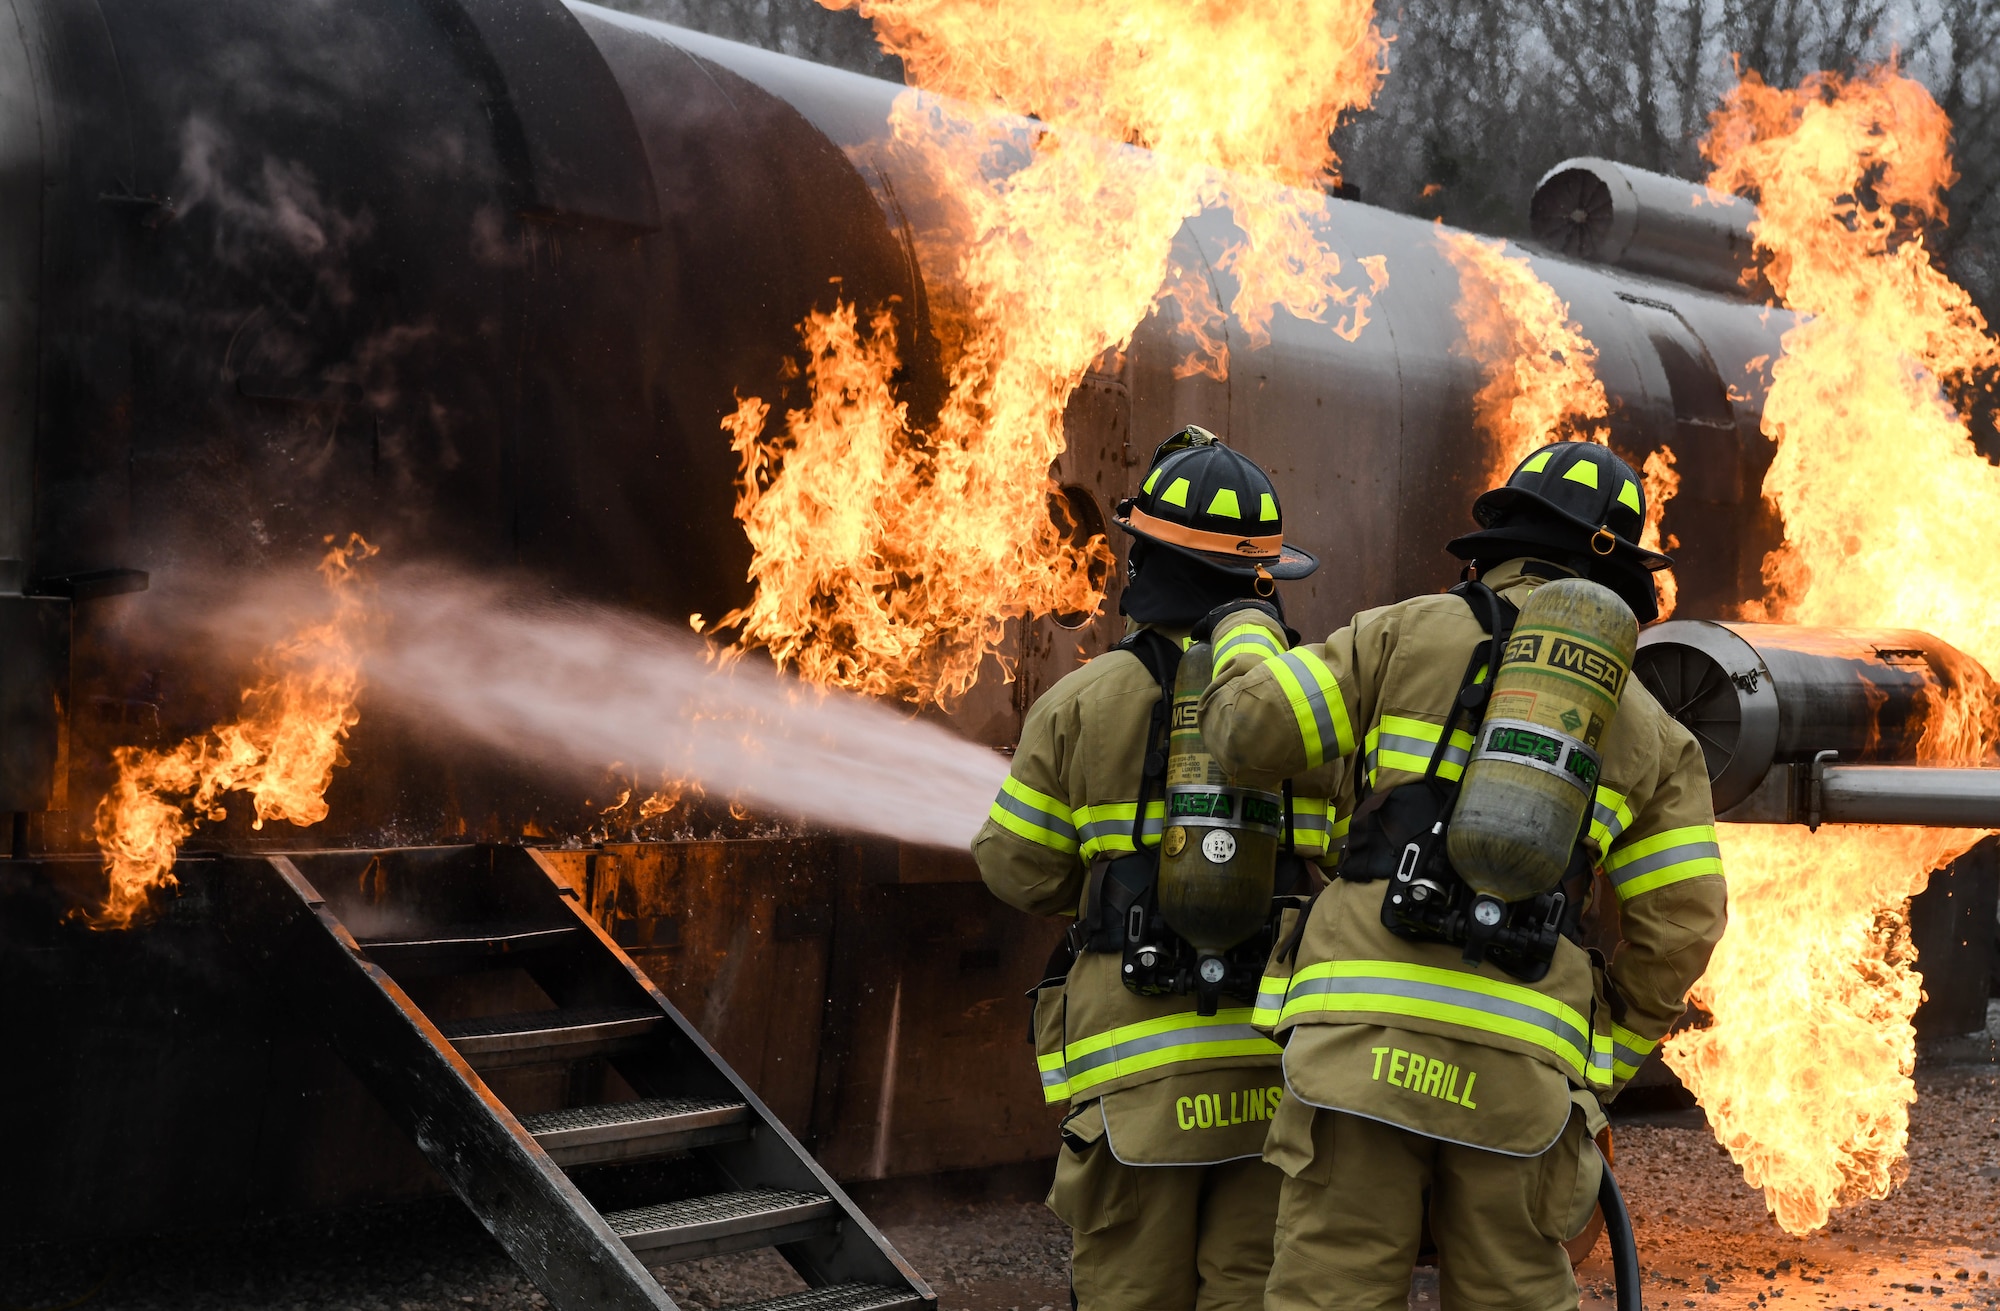 Arnold Air Force Base Fire and Emergency Services personnel battle a fuselage fire as they train, Feb. 9, 2021, on aircraft rescue and firefighting techniques at Arnold AFB, Tenn. The firefighters attacked the fire first with vehicle-mounted nozzles, then hand lines on the external blazes, before making entry into the aircraft. (U.S. Air Force photo by Jill Pickett)